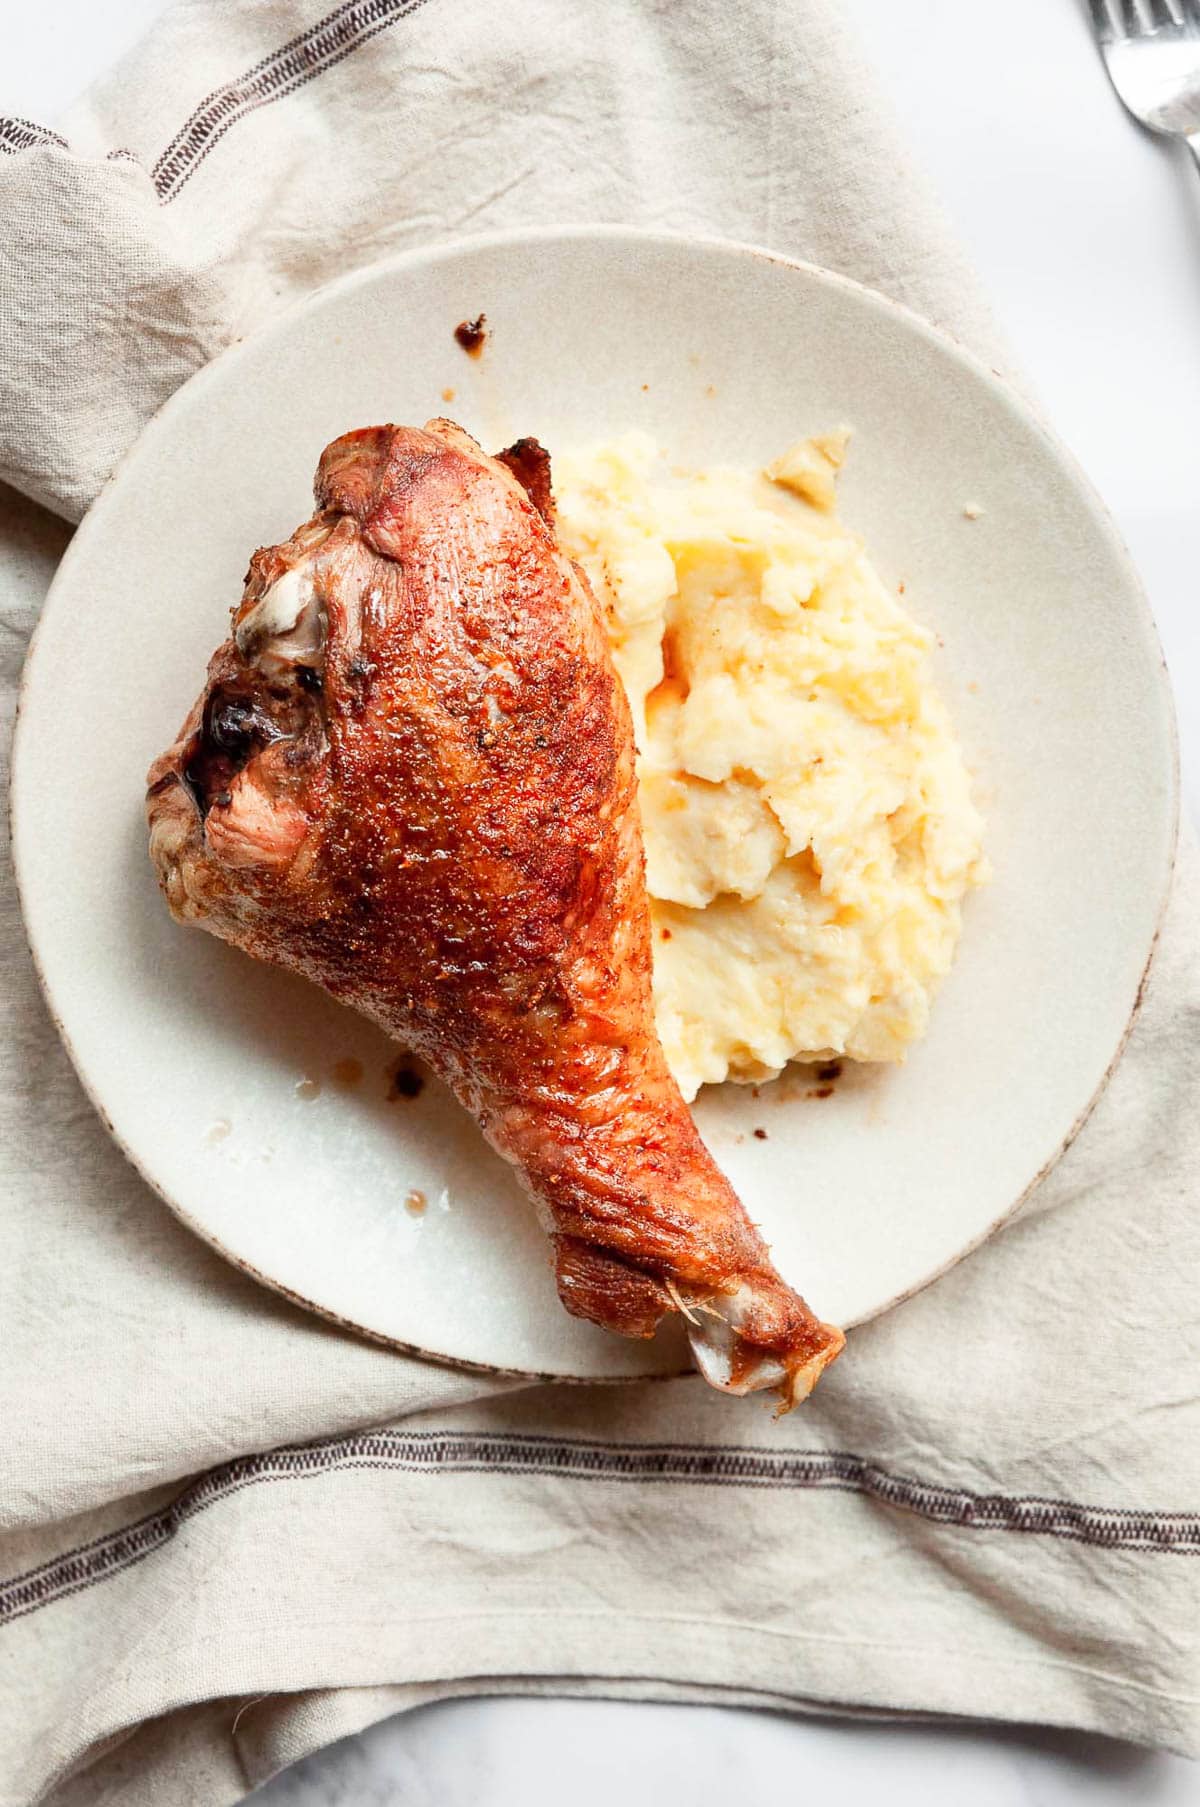 Baked turkey drumstick with mashed potatoes on a plate on top of linen towel.